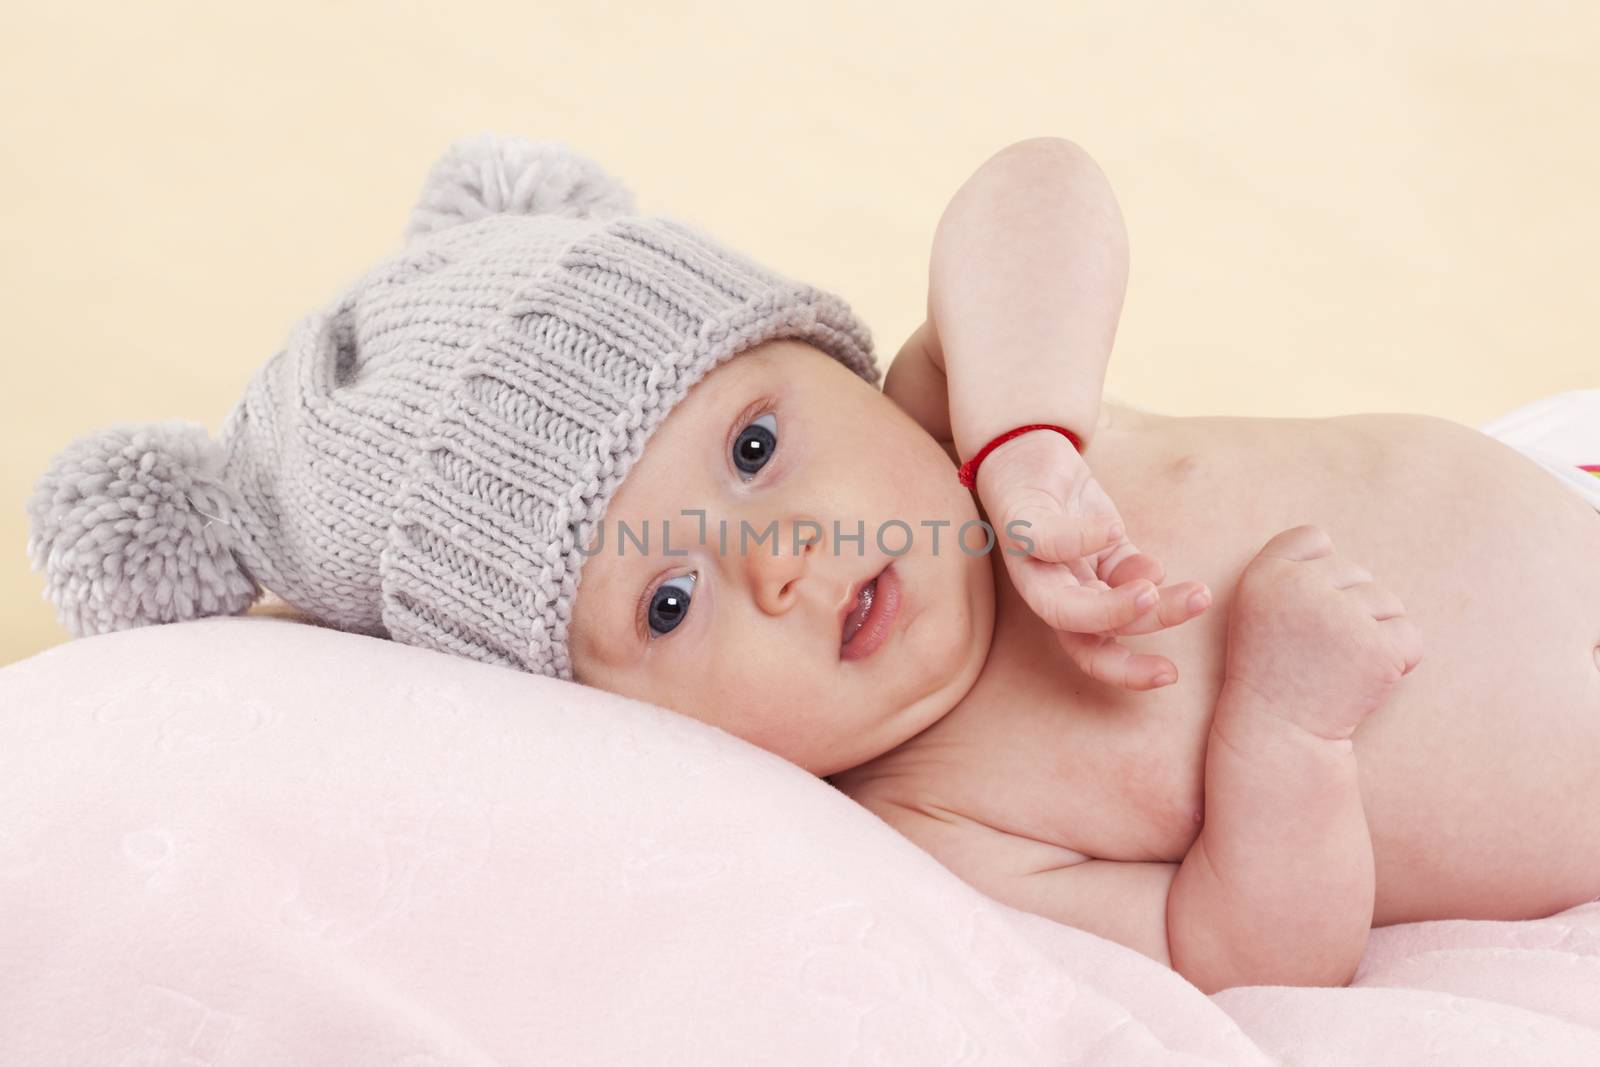 Cute naked baby girl with grey hat lying on a blanket and looking into the camera. Beautiful newborn concept.